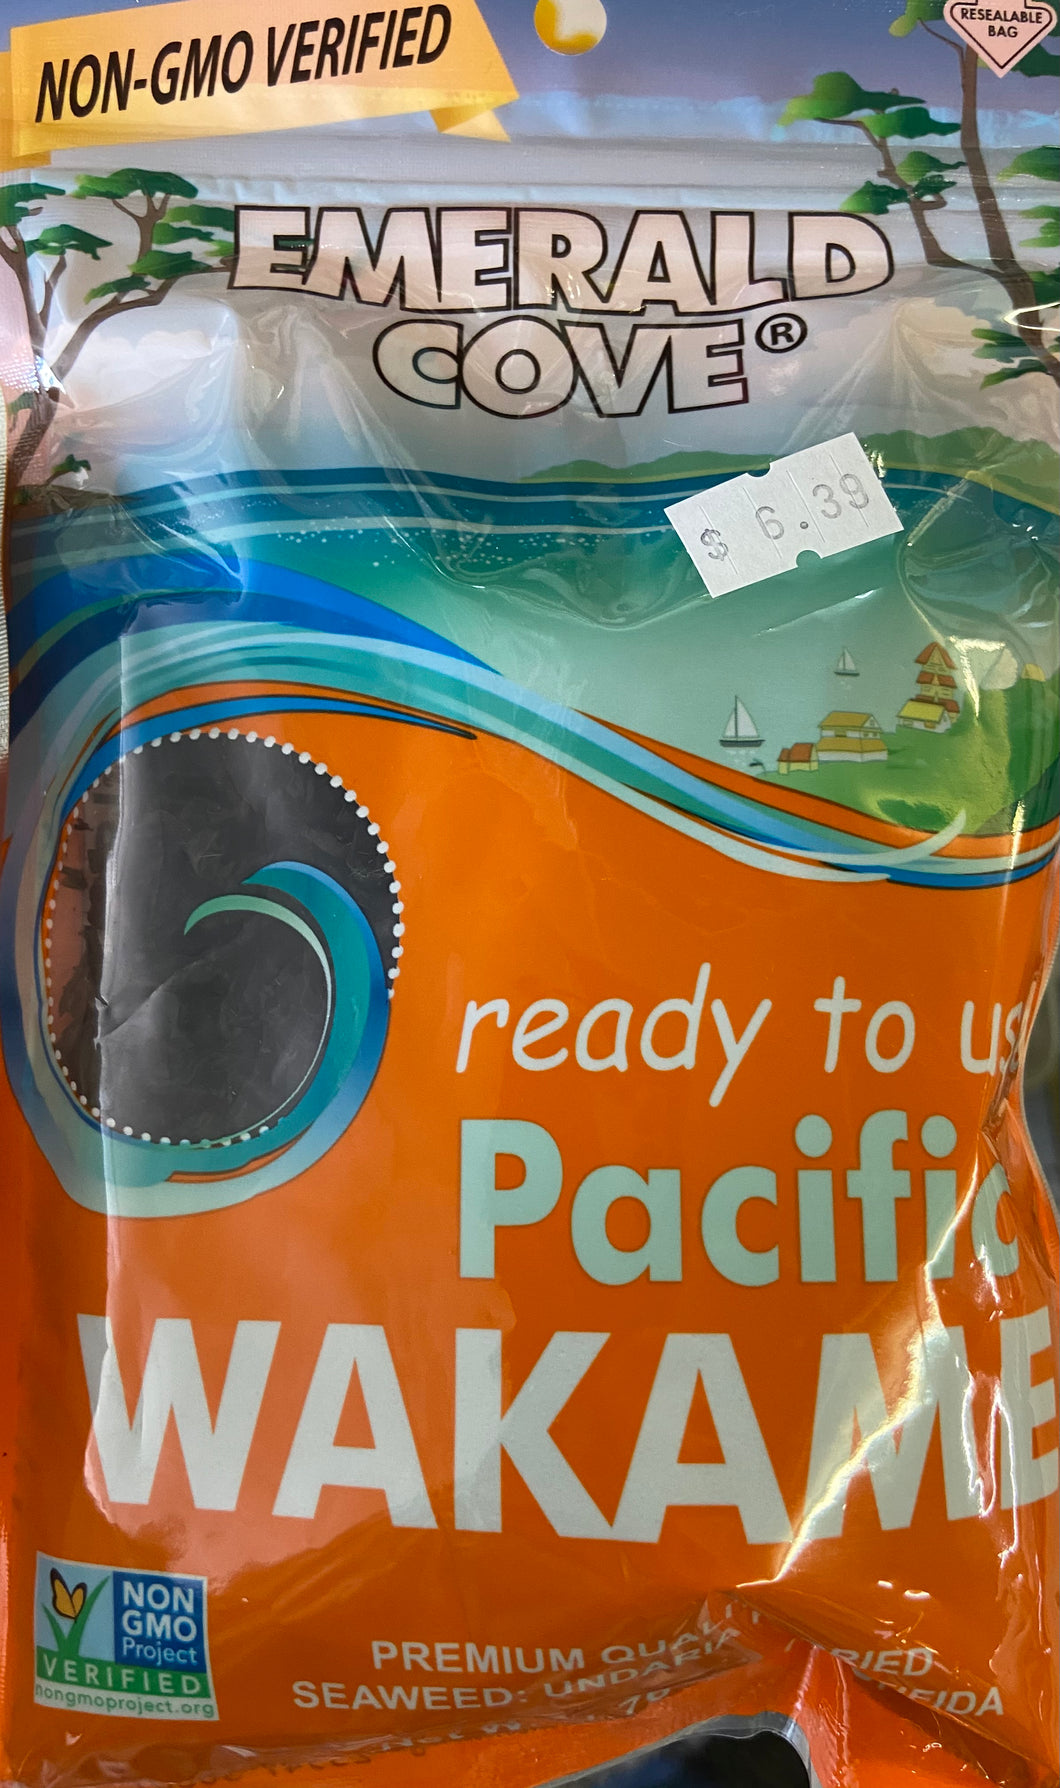 Wakame, Ready to Use, Pacific Emerald Cove